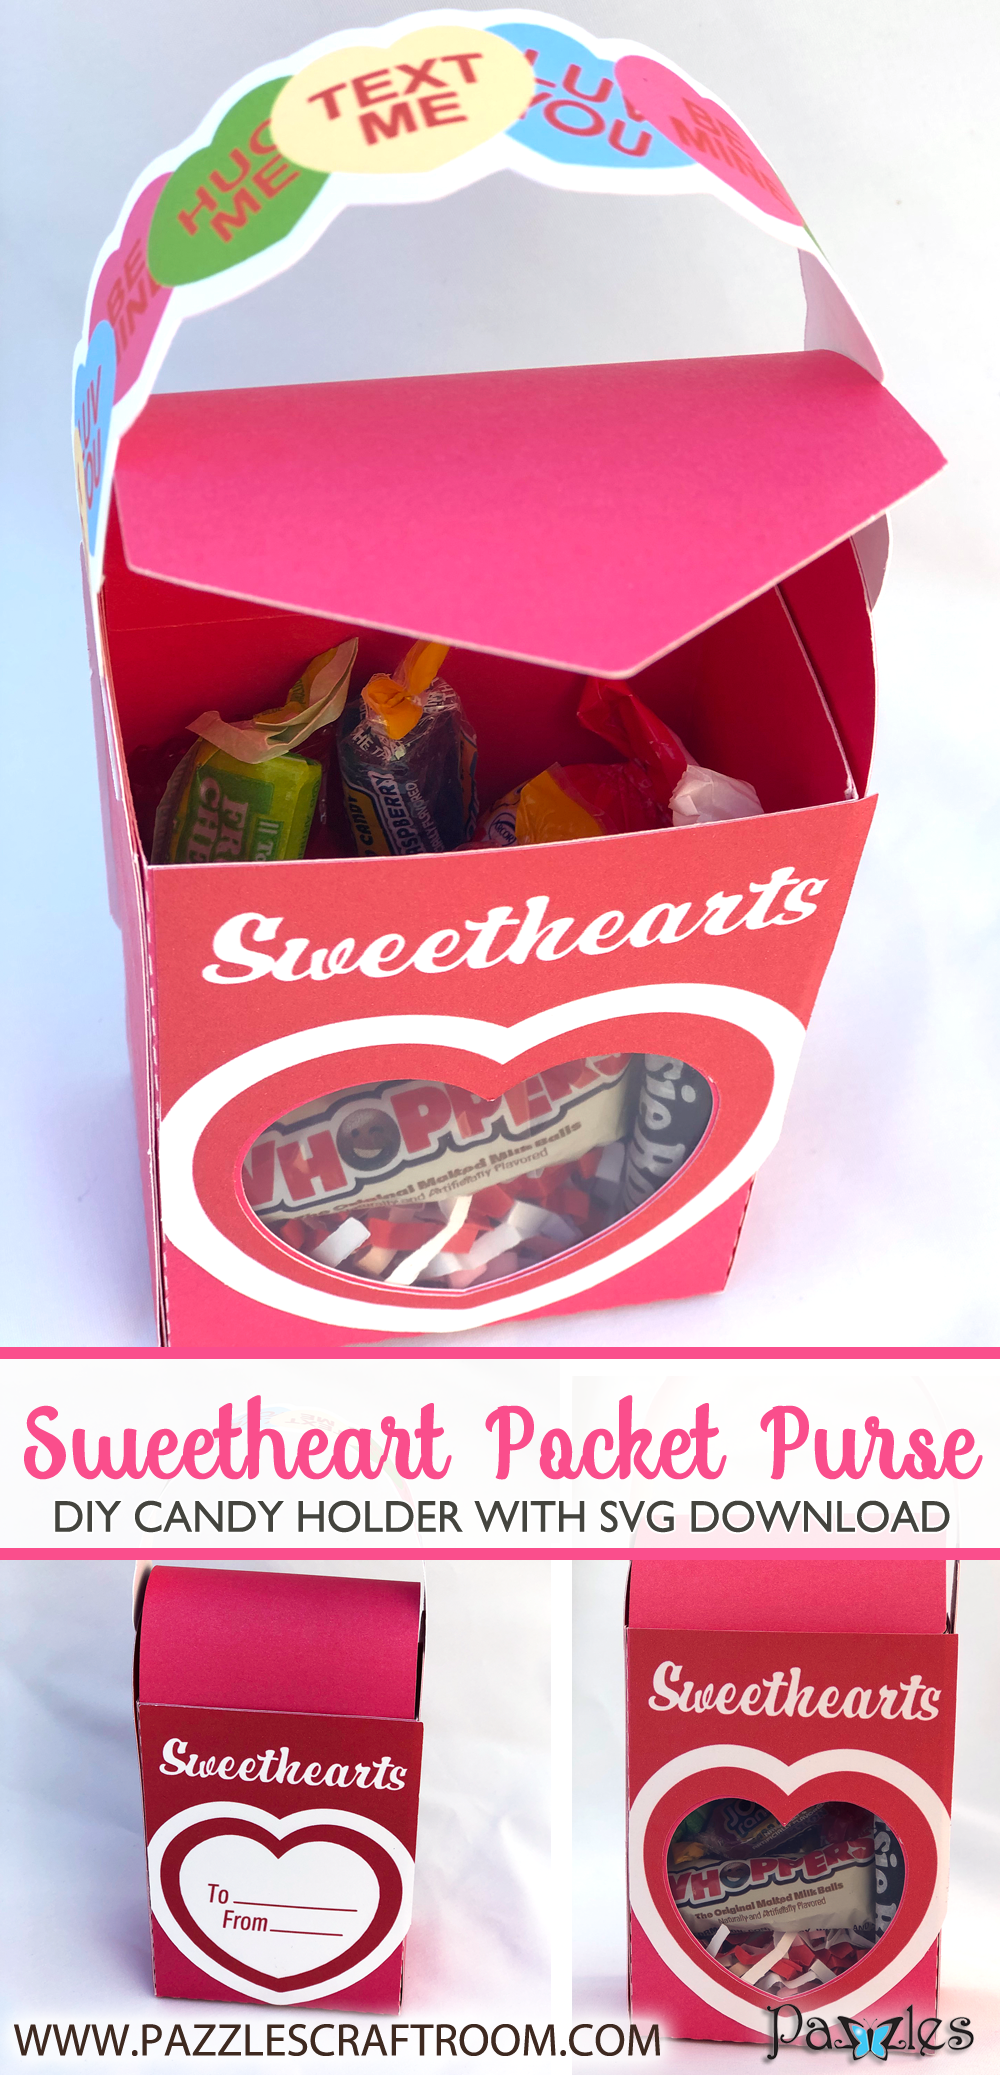 Pazzles DIY Valentine Sweetheart Pocket Purse Box with instant SVG download. Compatible with all major electronic cutters including Pazzles Inspiration, Circut, and Silhouette Cameo. Design by Alma Cervantes.